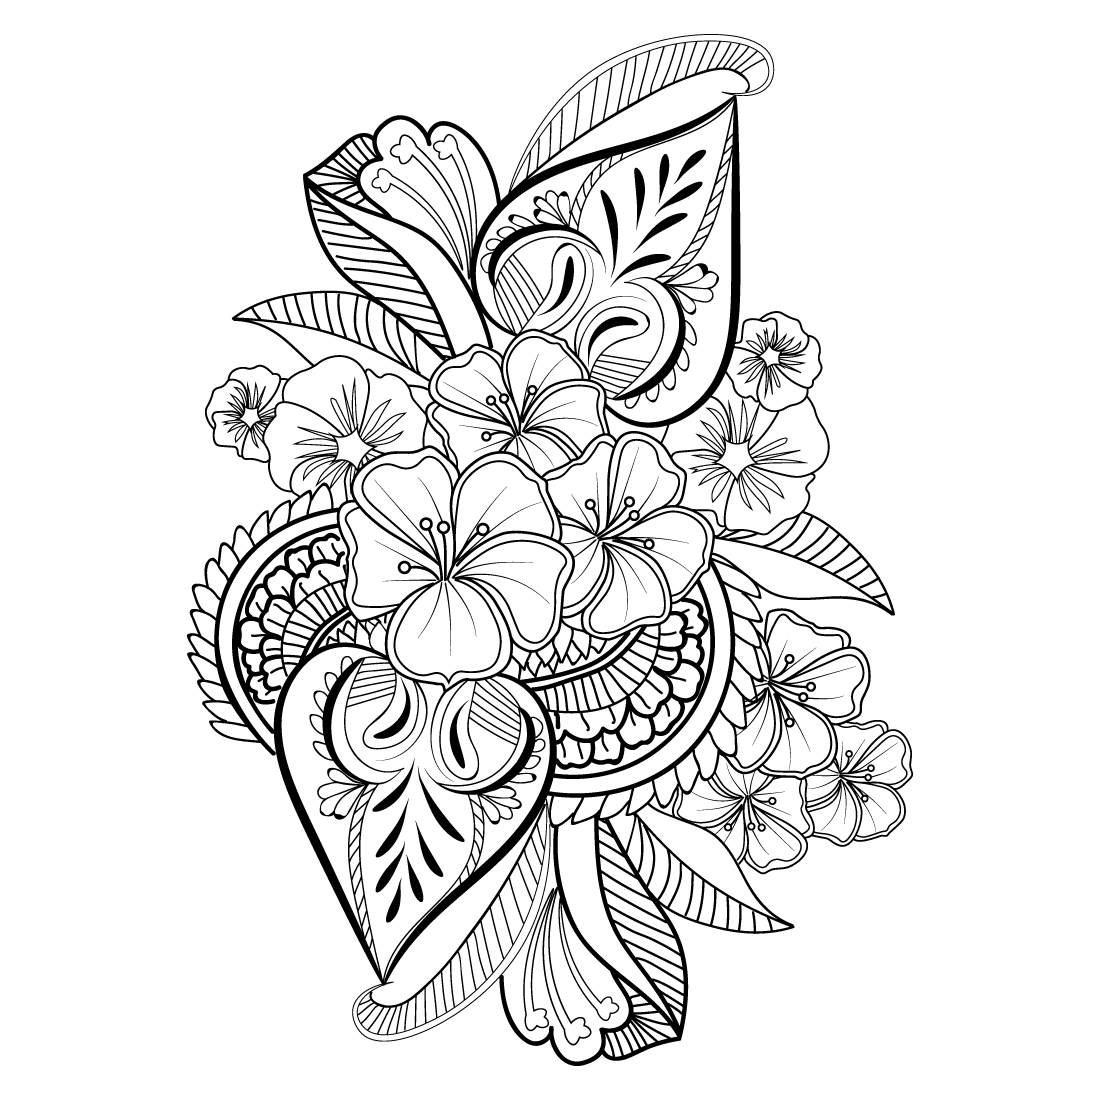 Black and white drawing of a bouquet of flowers.